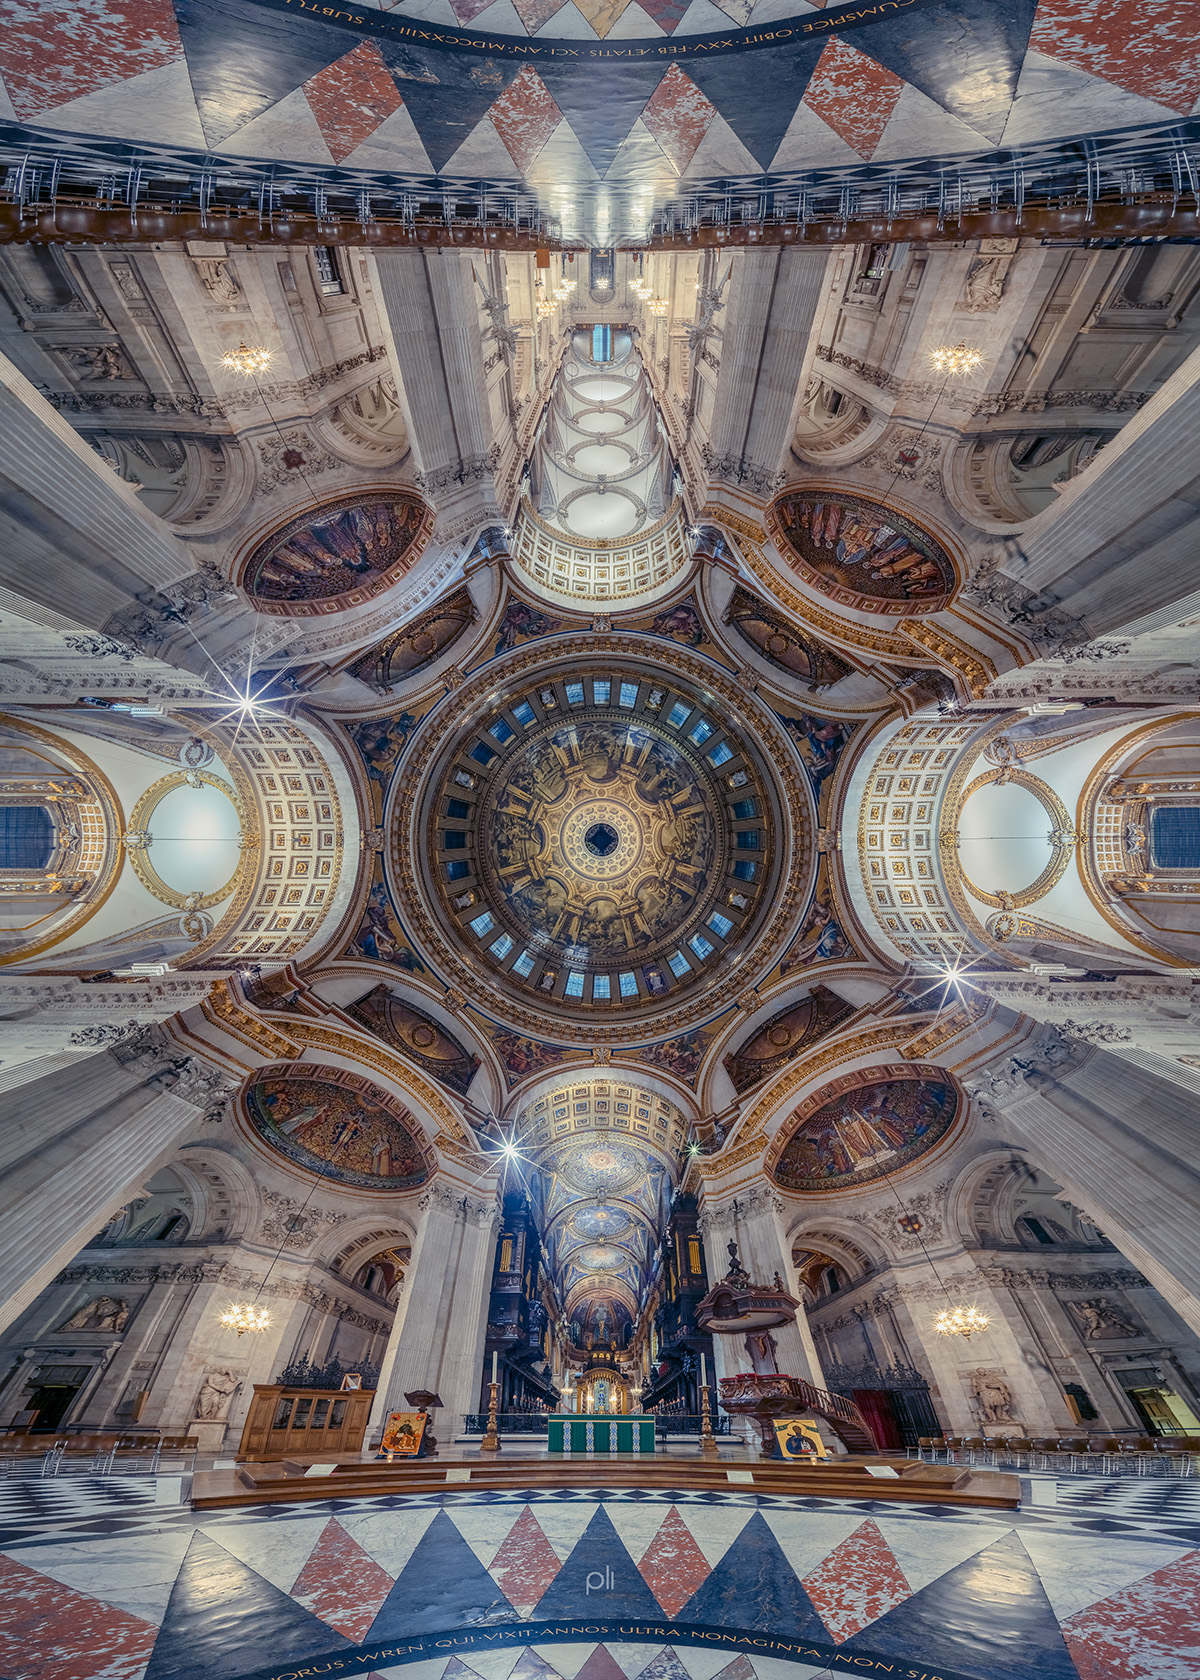 General 1200x1680 architecture interior cathedral Peter Li church ceiling photo manipulation altar portrait display symmetry St. Paul's Cathedral UK London England arch painting